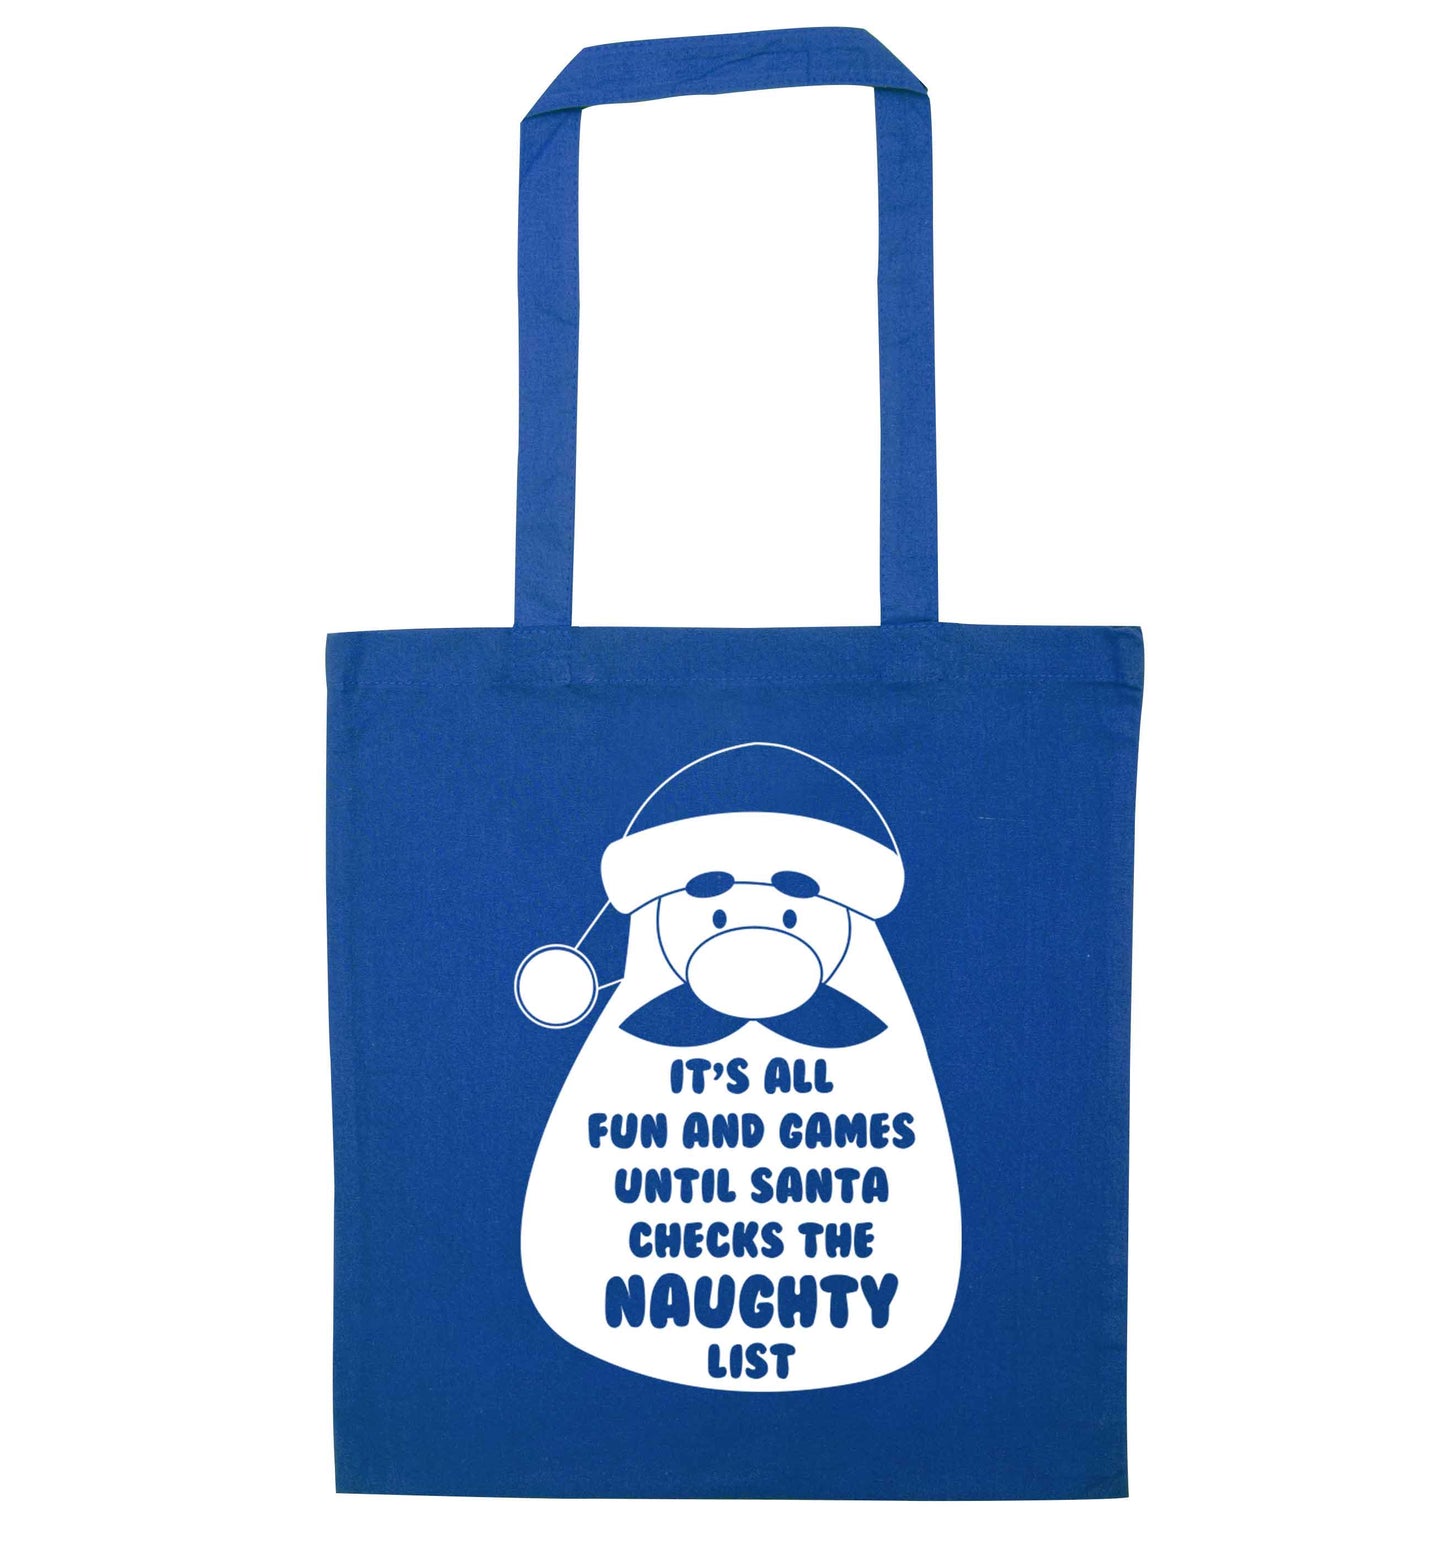 It's all fun and games until Santa checks the naughty list blue tote bag